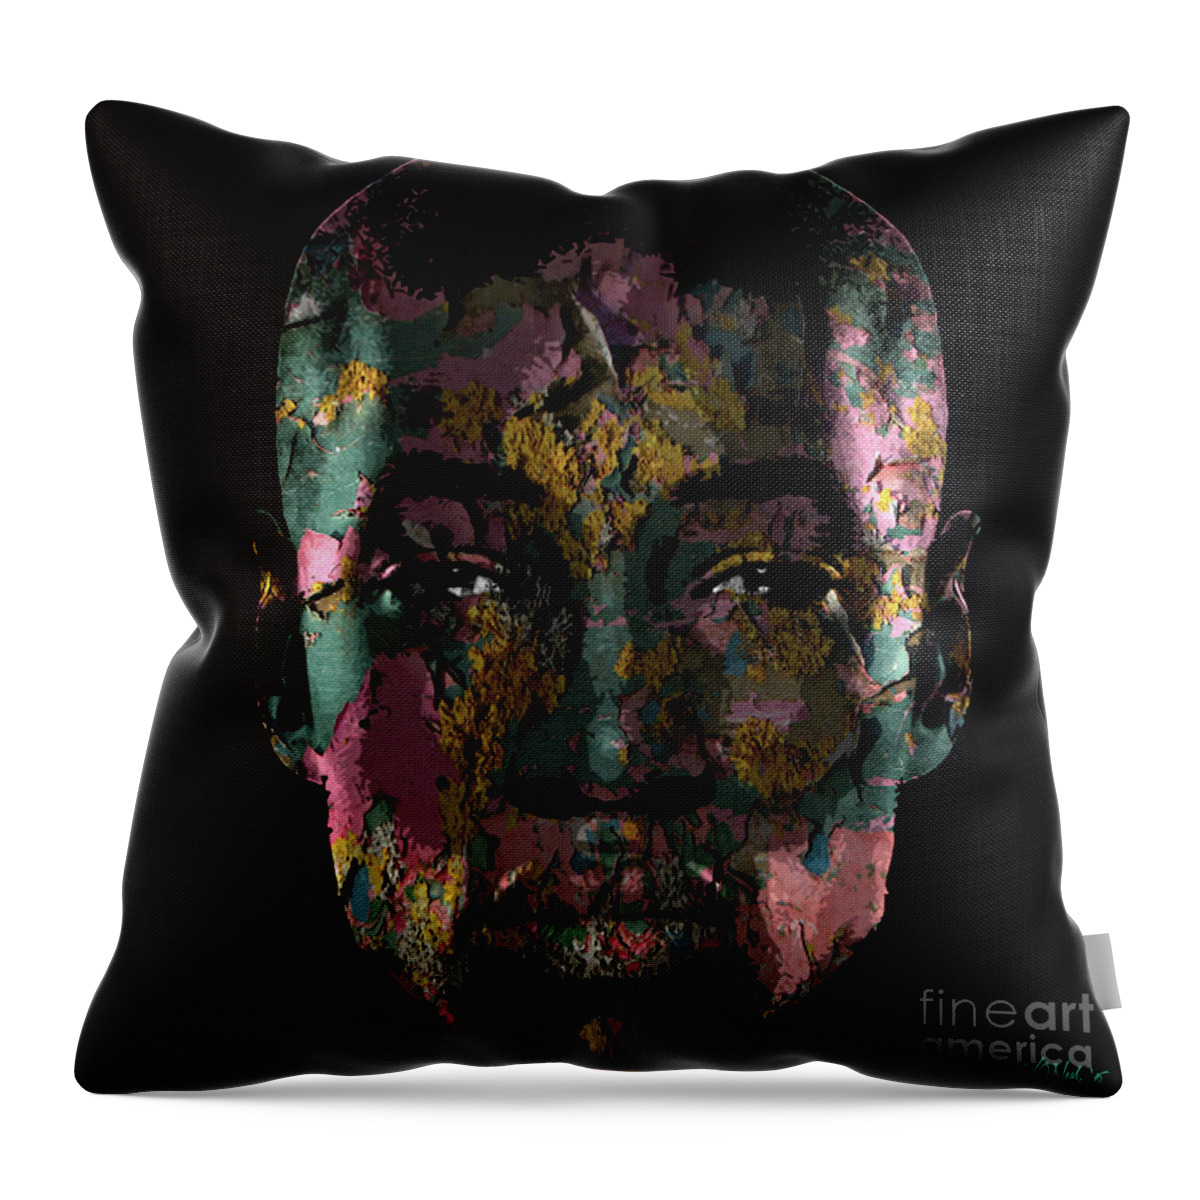 Faces Throw Pillow featuring the digital art Cryptofacia 3 - James by Walter Neal